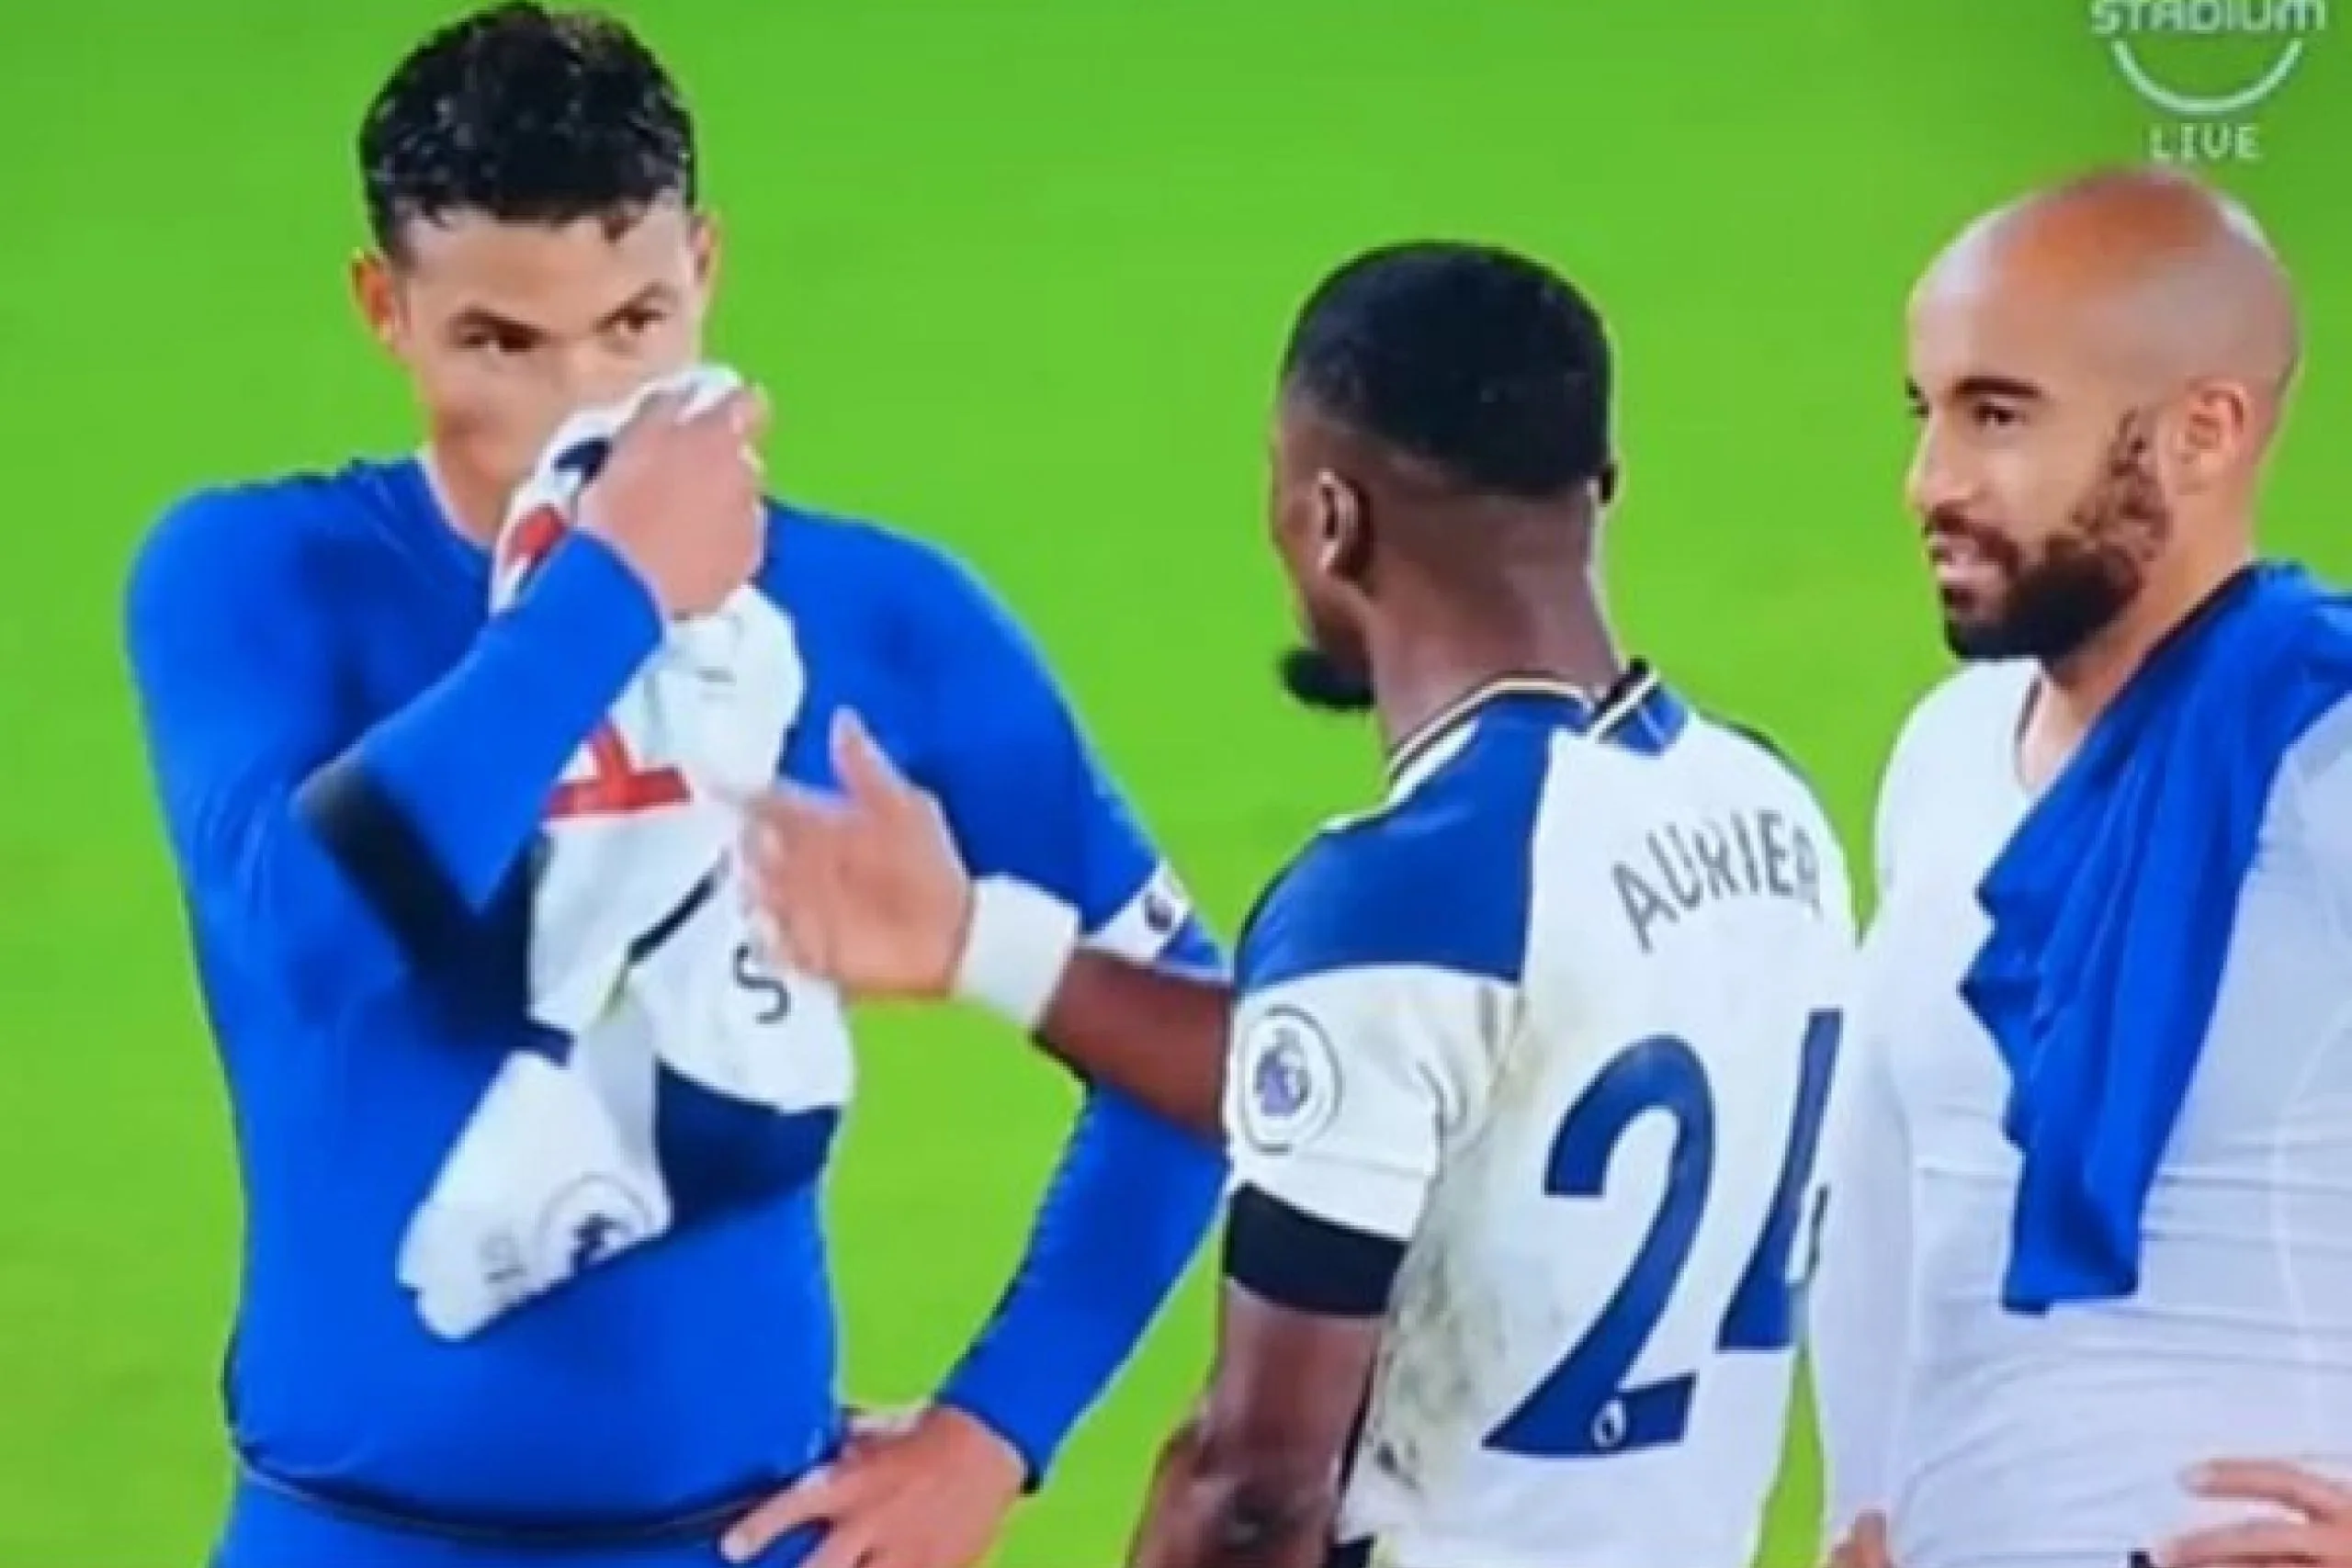 Thiago Silva wiping his nose with Lucas Moura's Tottenham jersey